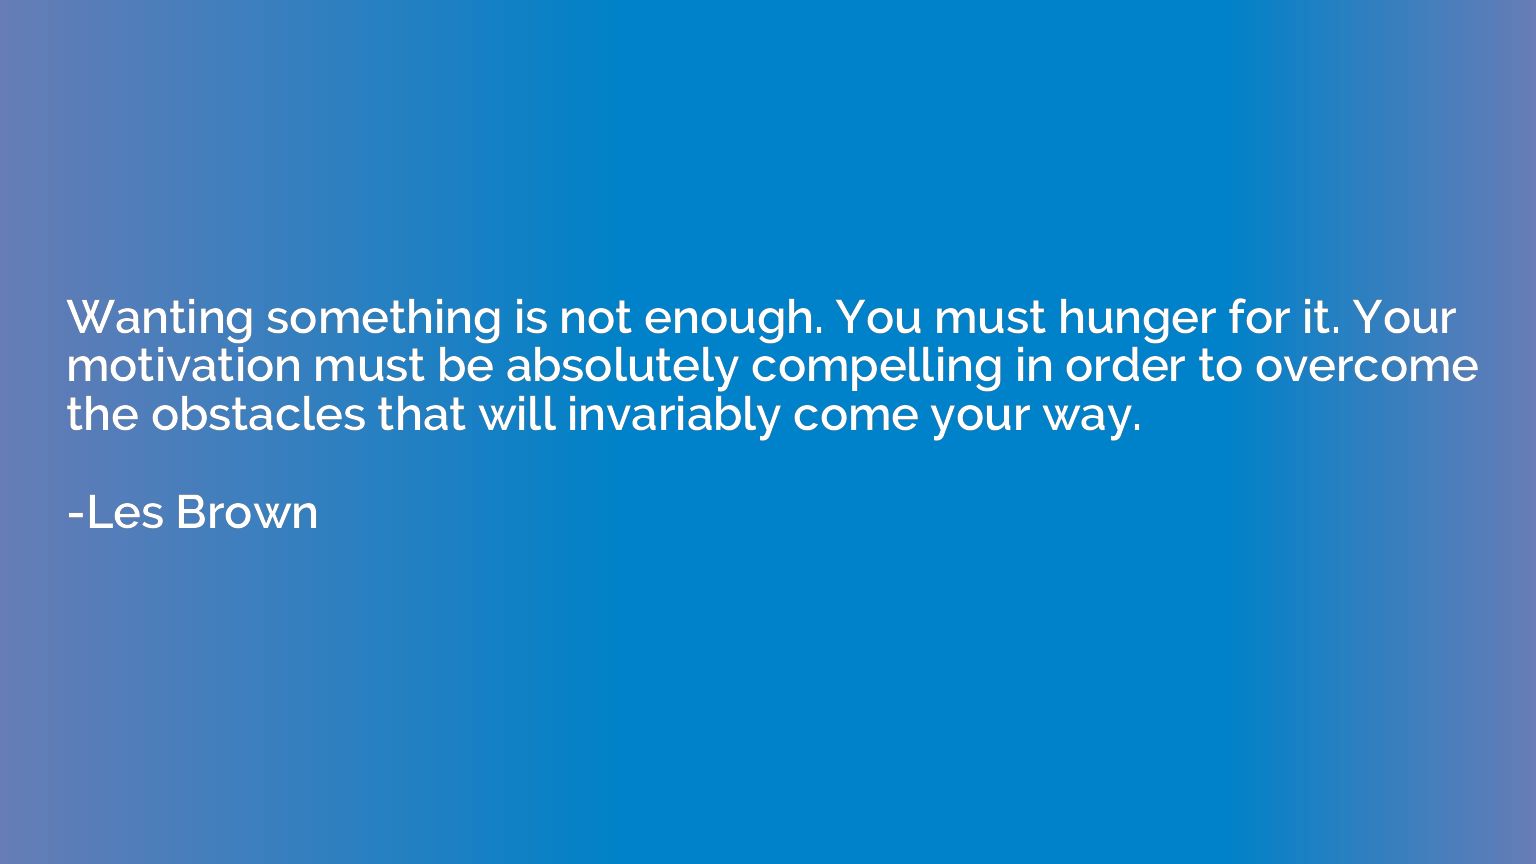 Wanting something is not enough. You must hunger for it. You